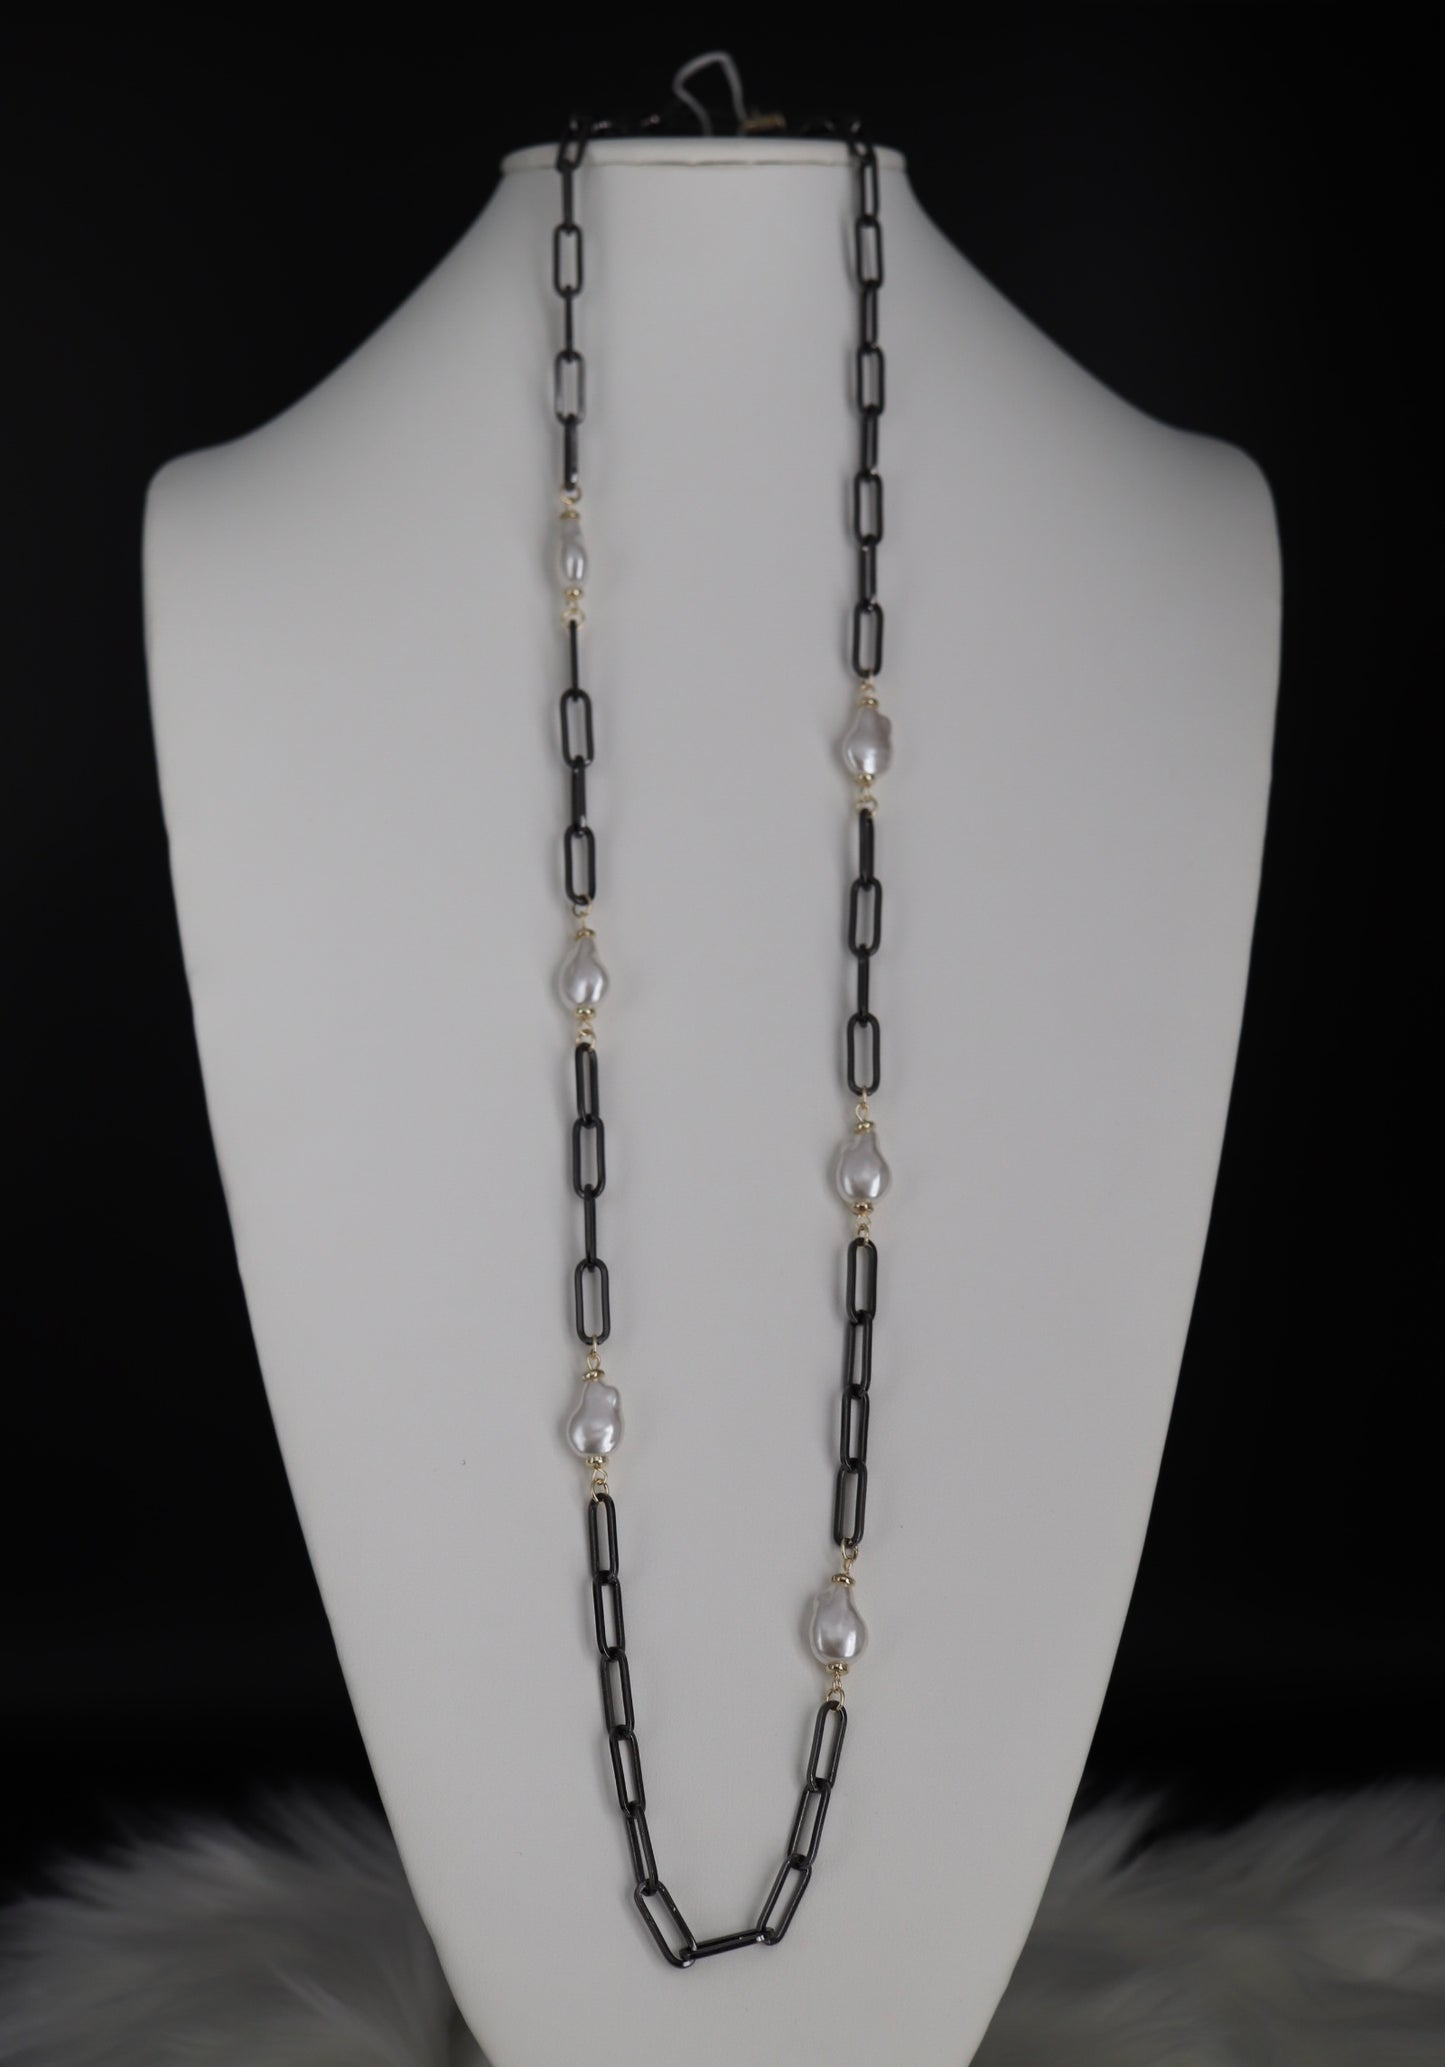 Lone Black Necklace With Pearl Stations